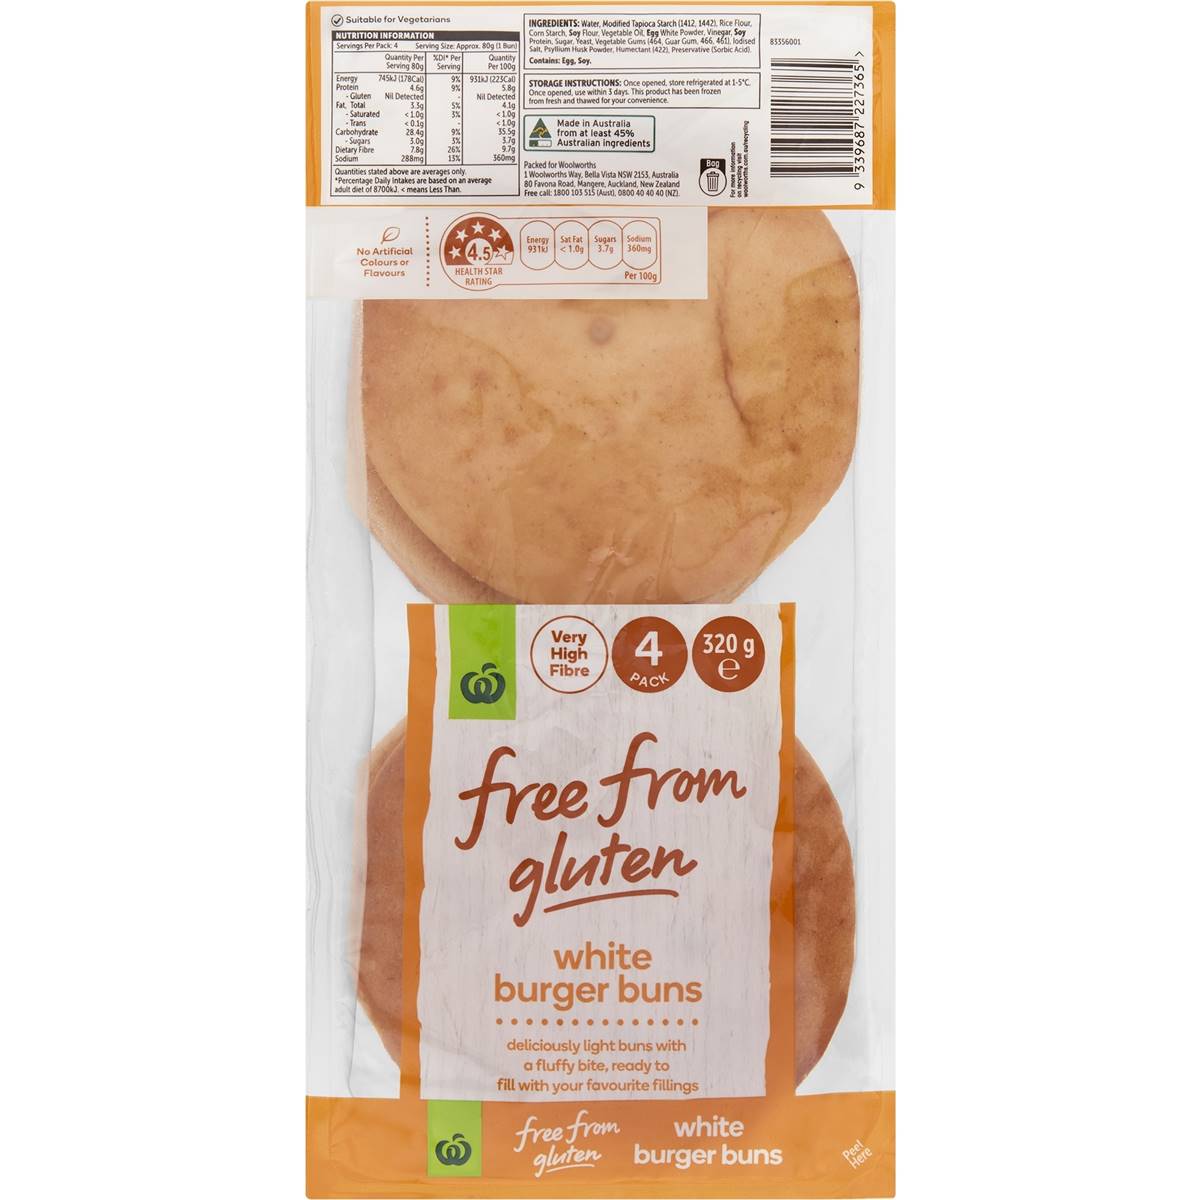 Calories in Woolworths Free From Gluten White Burger Buns